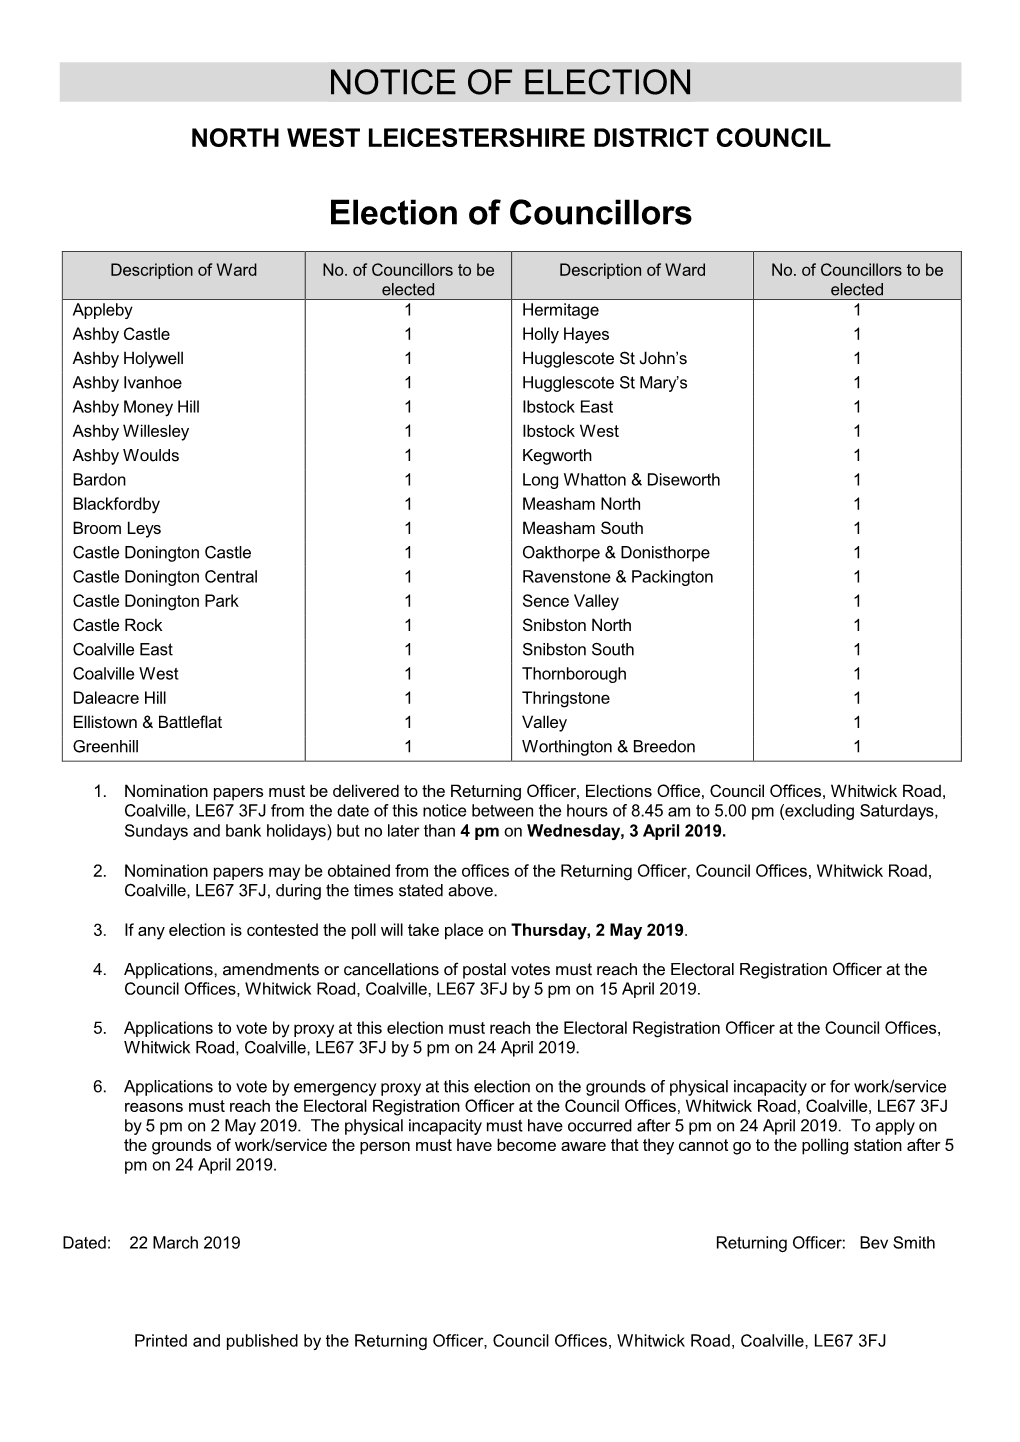 Notice of Election of District Councillors